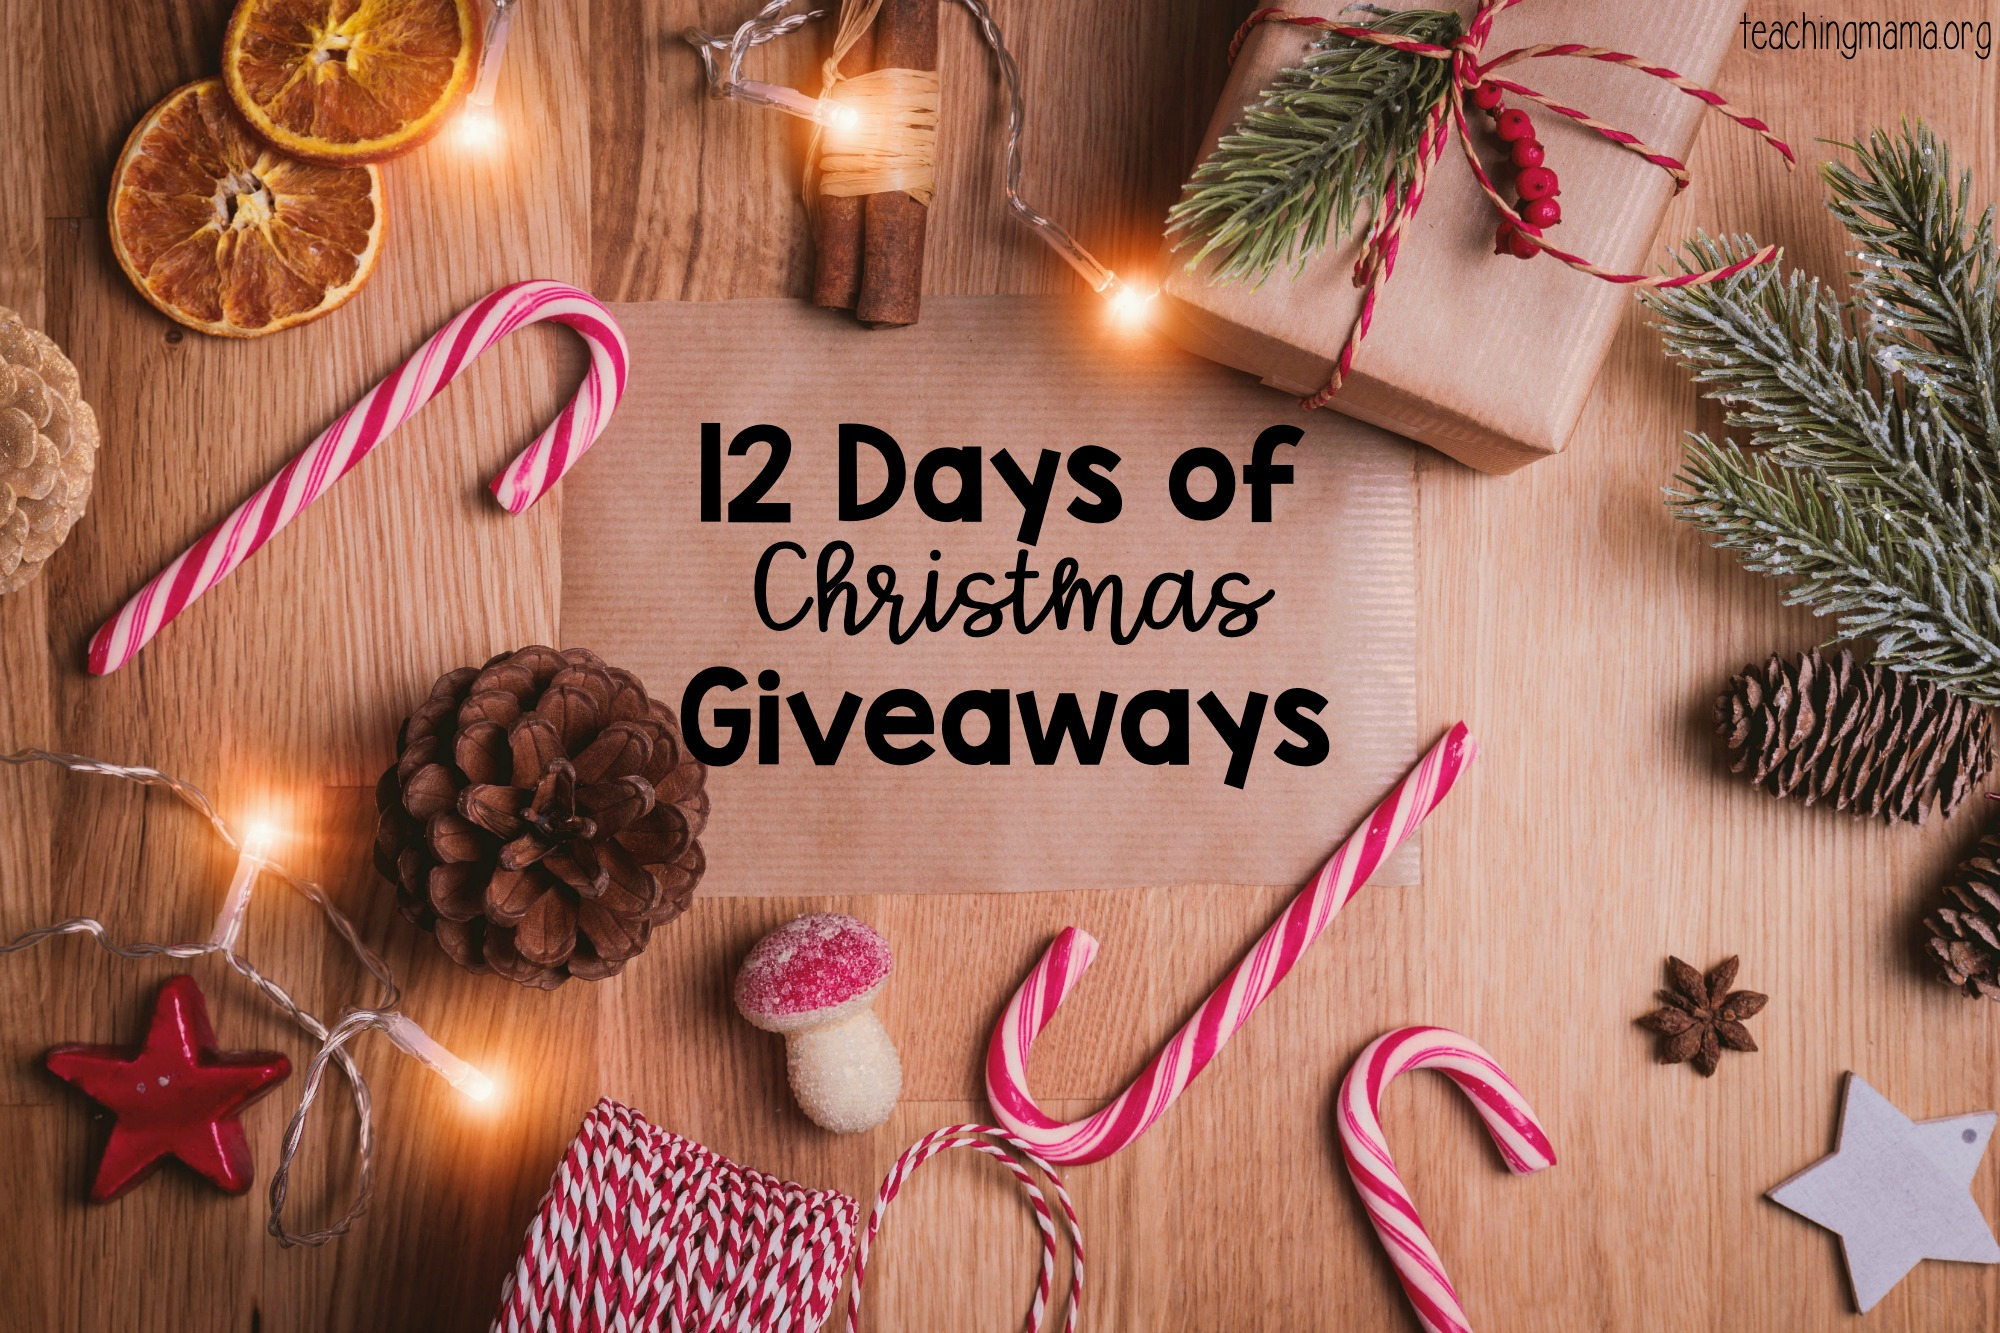 12 Days Of Christmas Giveaways! - Teaching Mama